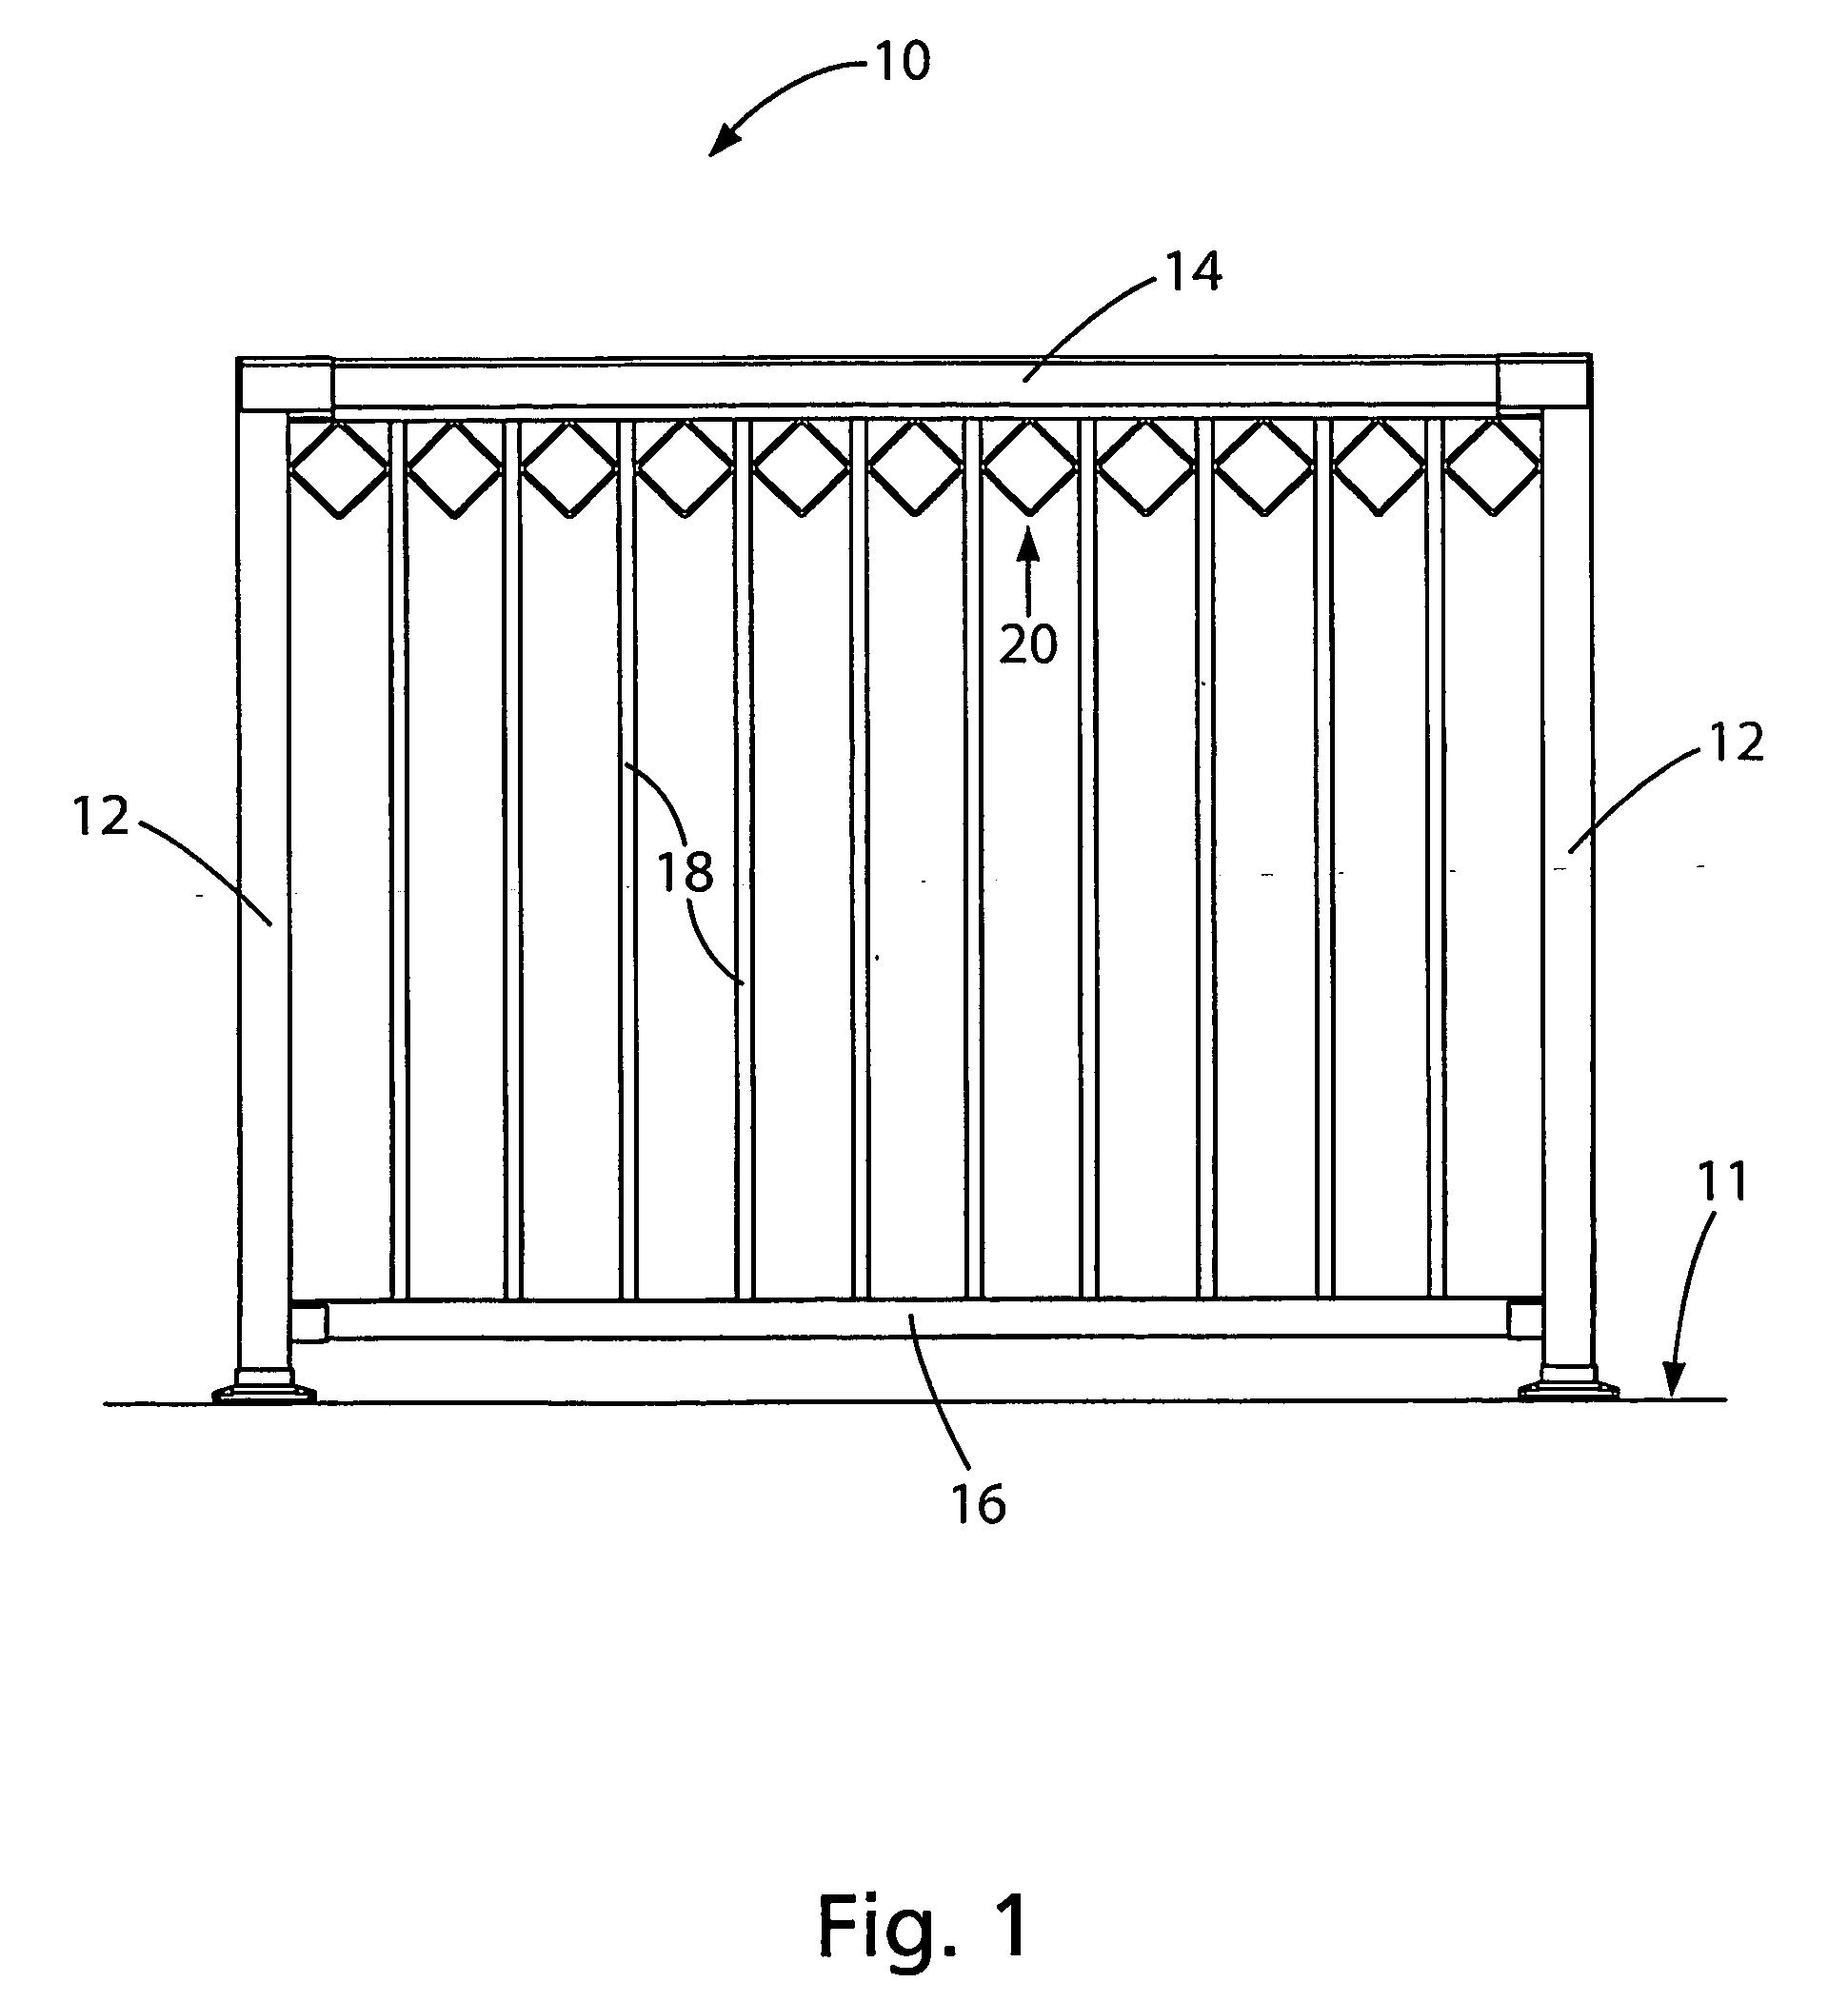 Ornament picket spacer for a railing system